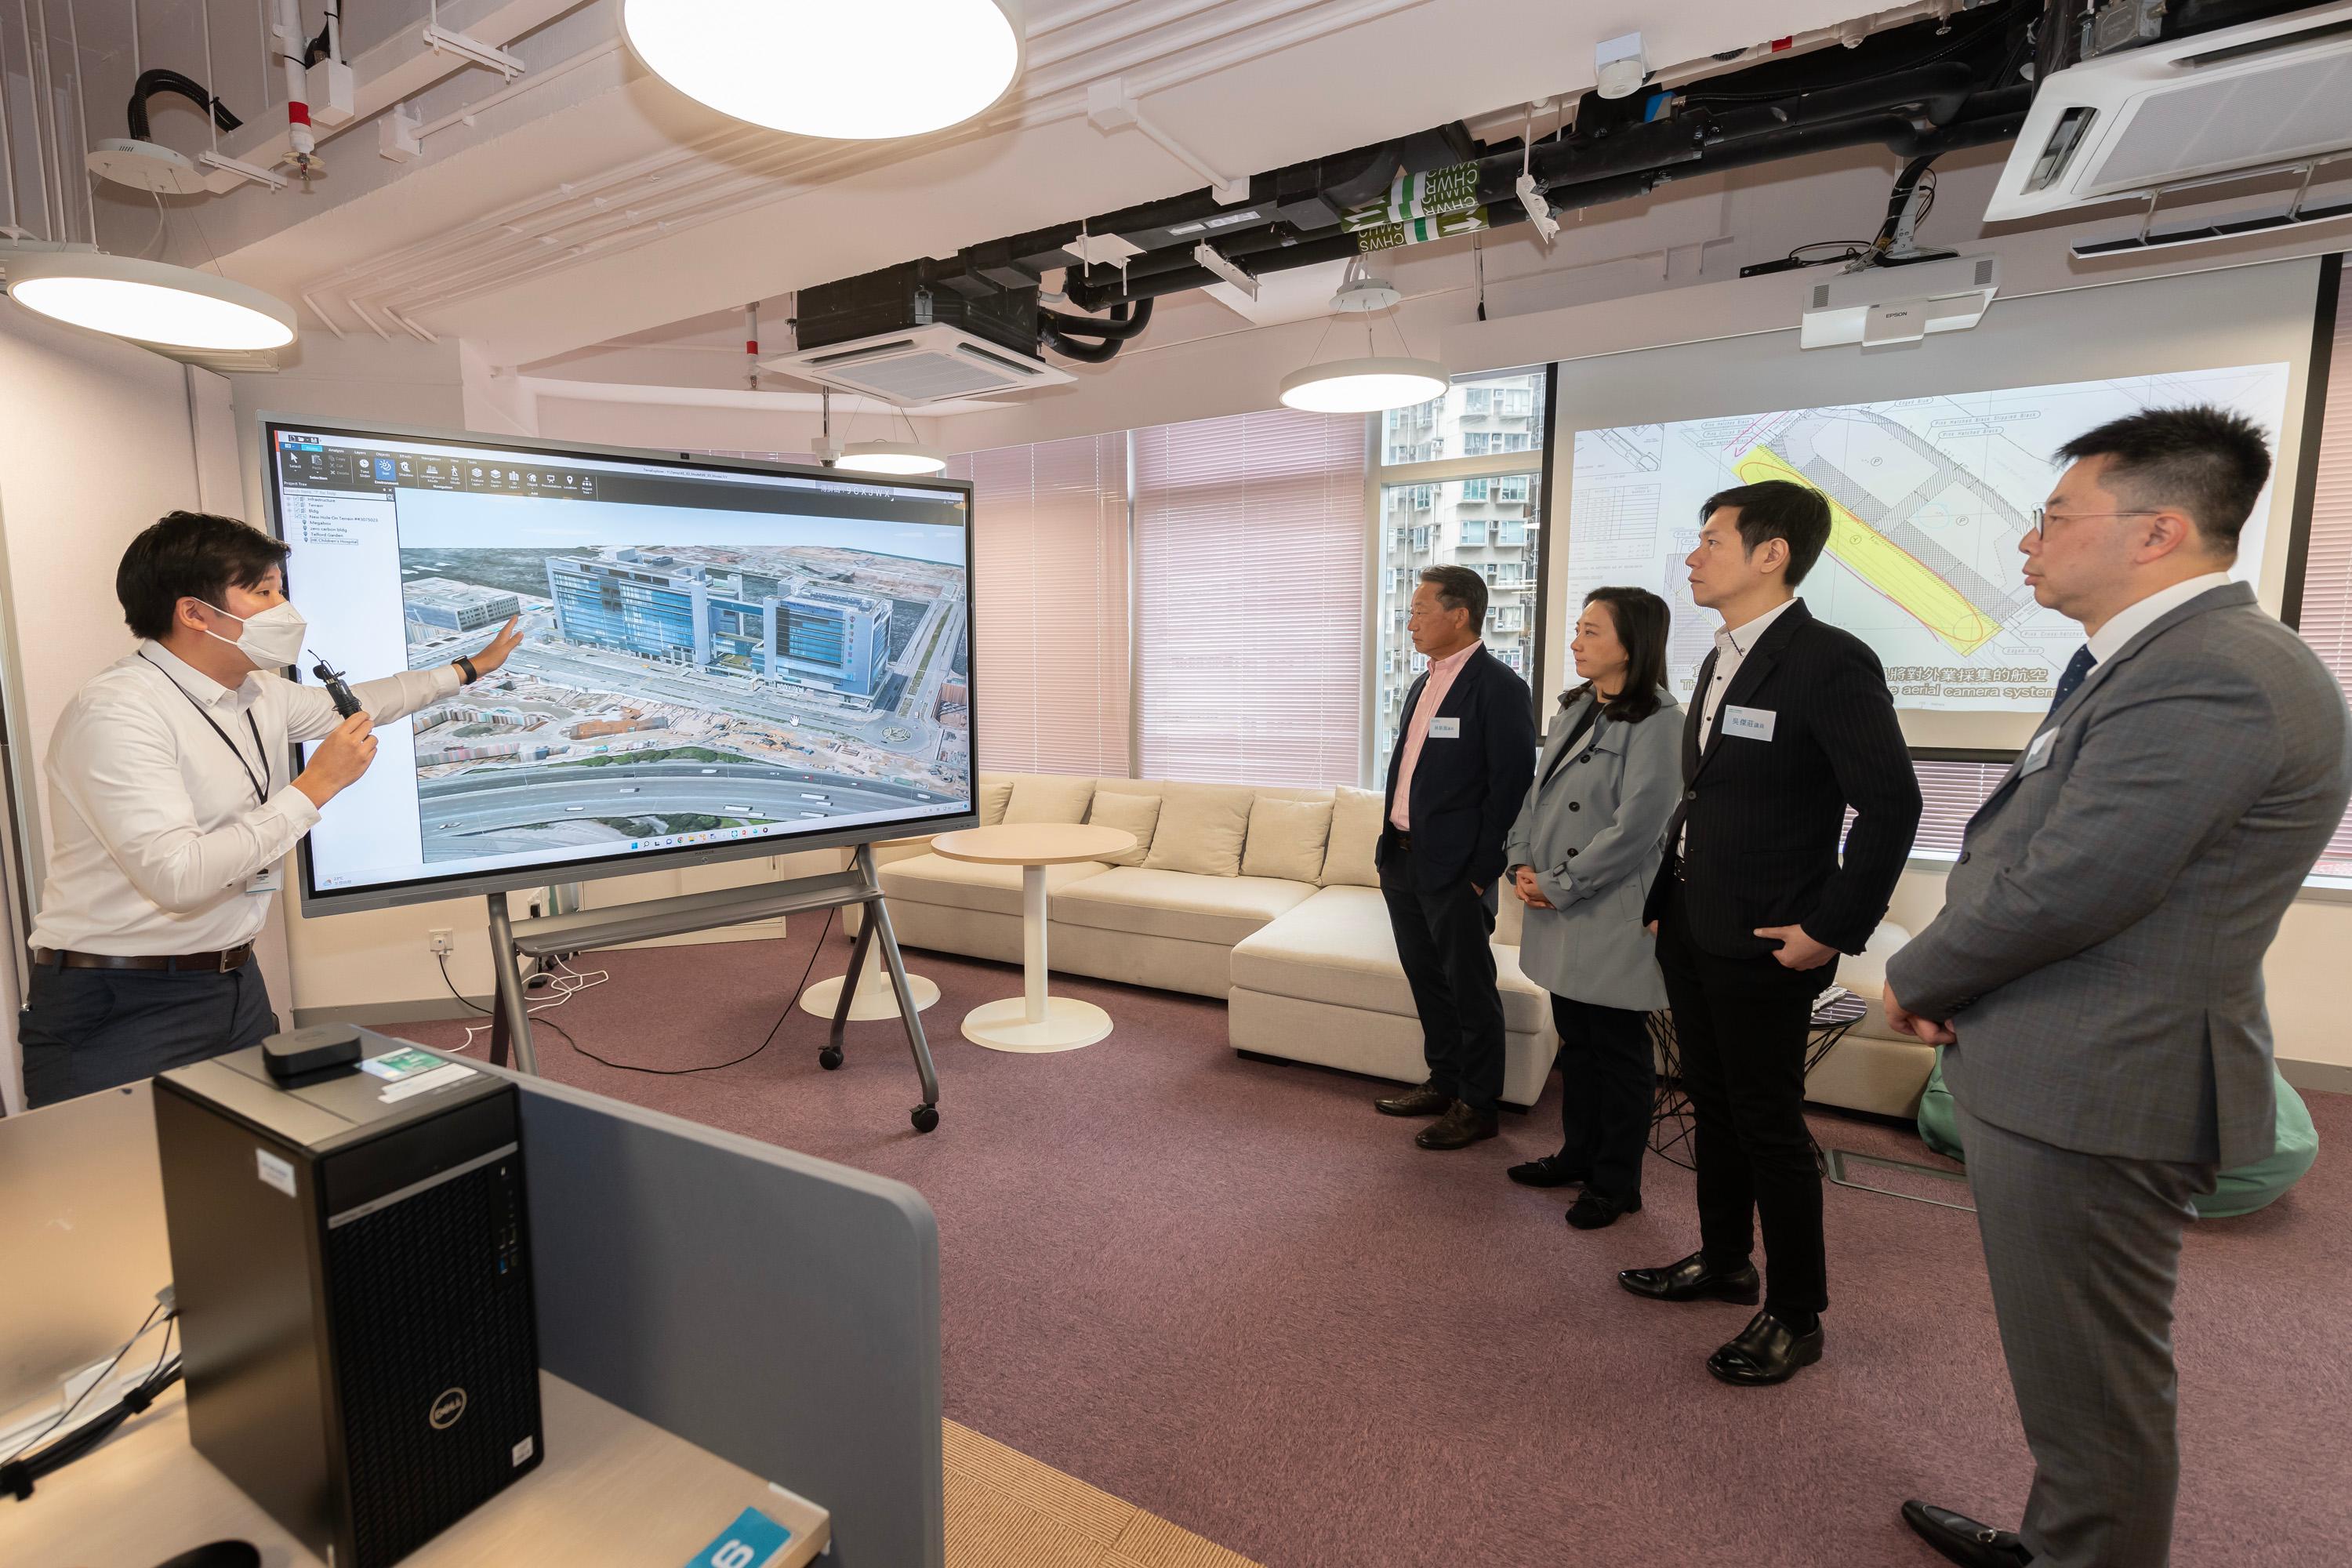 The Legislative Council Subcommittee on Matters Relating to the Development of Smart City visited the Geospatial Lab (GeoLab) today (May 9). Photo shows the Chairman of the Subcommittee, Ms Elizabeth Quat (third right); the Deputy Chairman of the Subcommittee, Dr Johnny Ng (second right)' and Subcommittee member Mr Lam San-keung (fourth right), observing the demonstration of the Urban Renewal Information System.